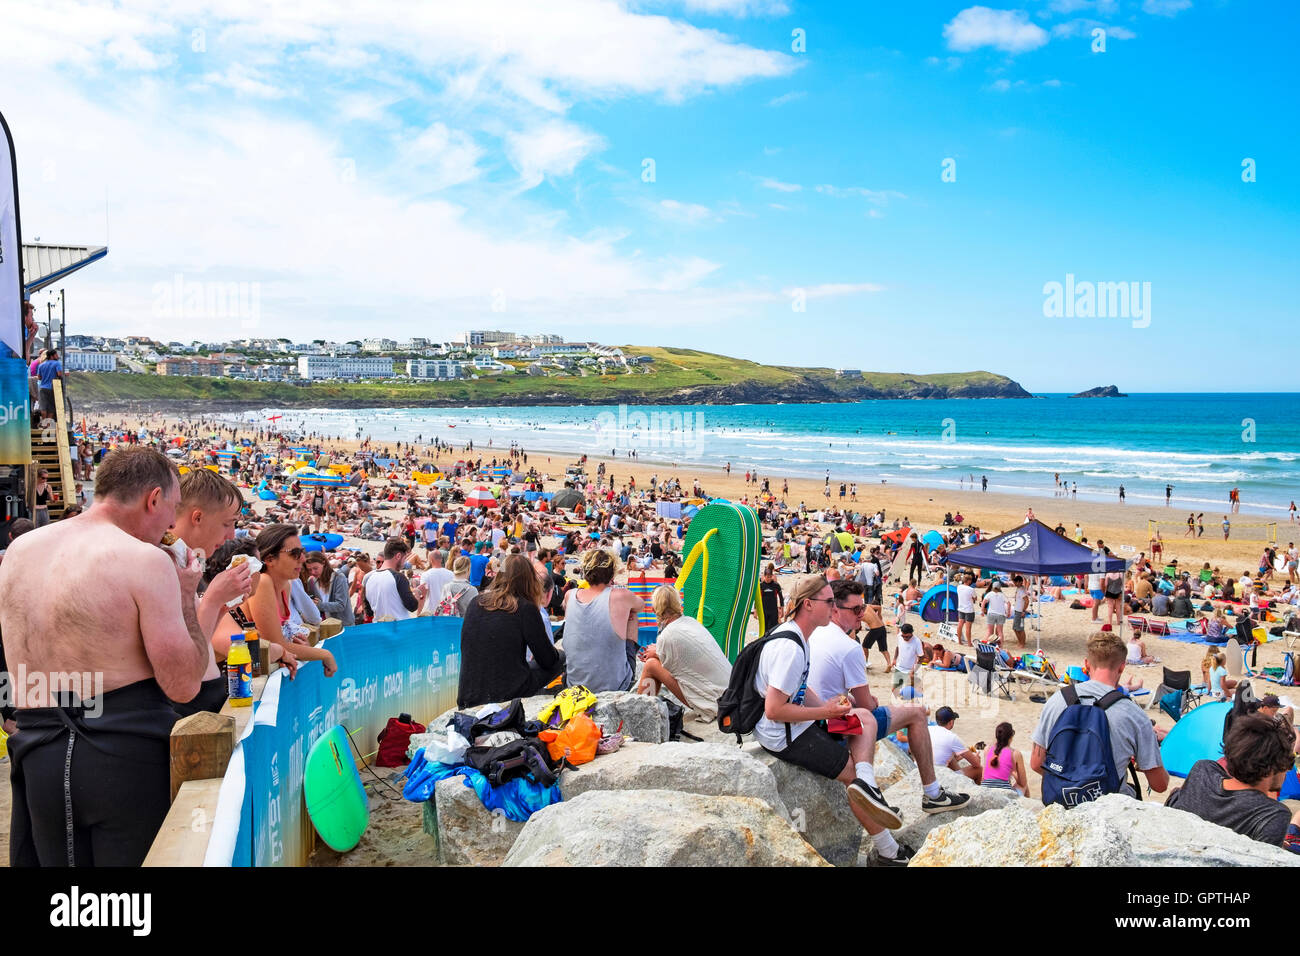 A crowded fistral beach for the annual boardmasters surfing competition at newquay in cornwall, uk Stock Photo